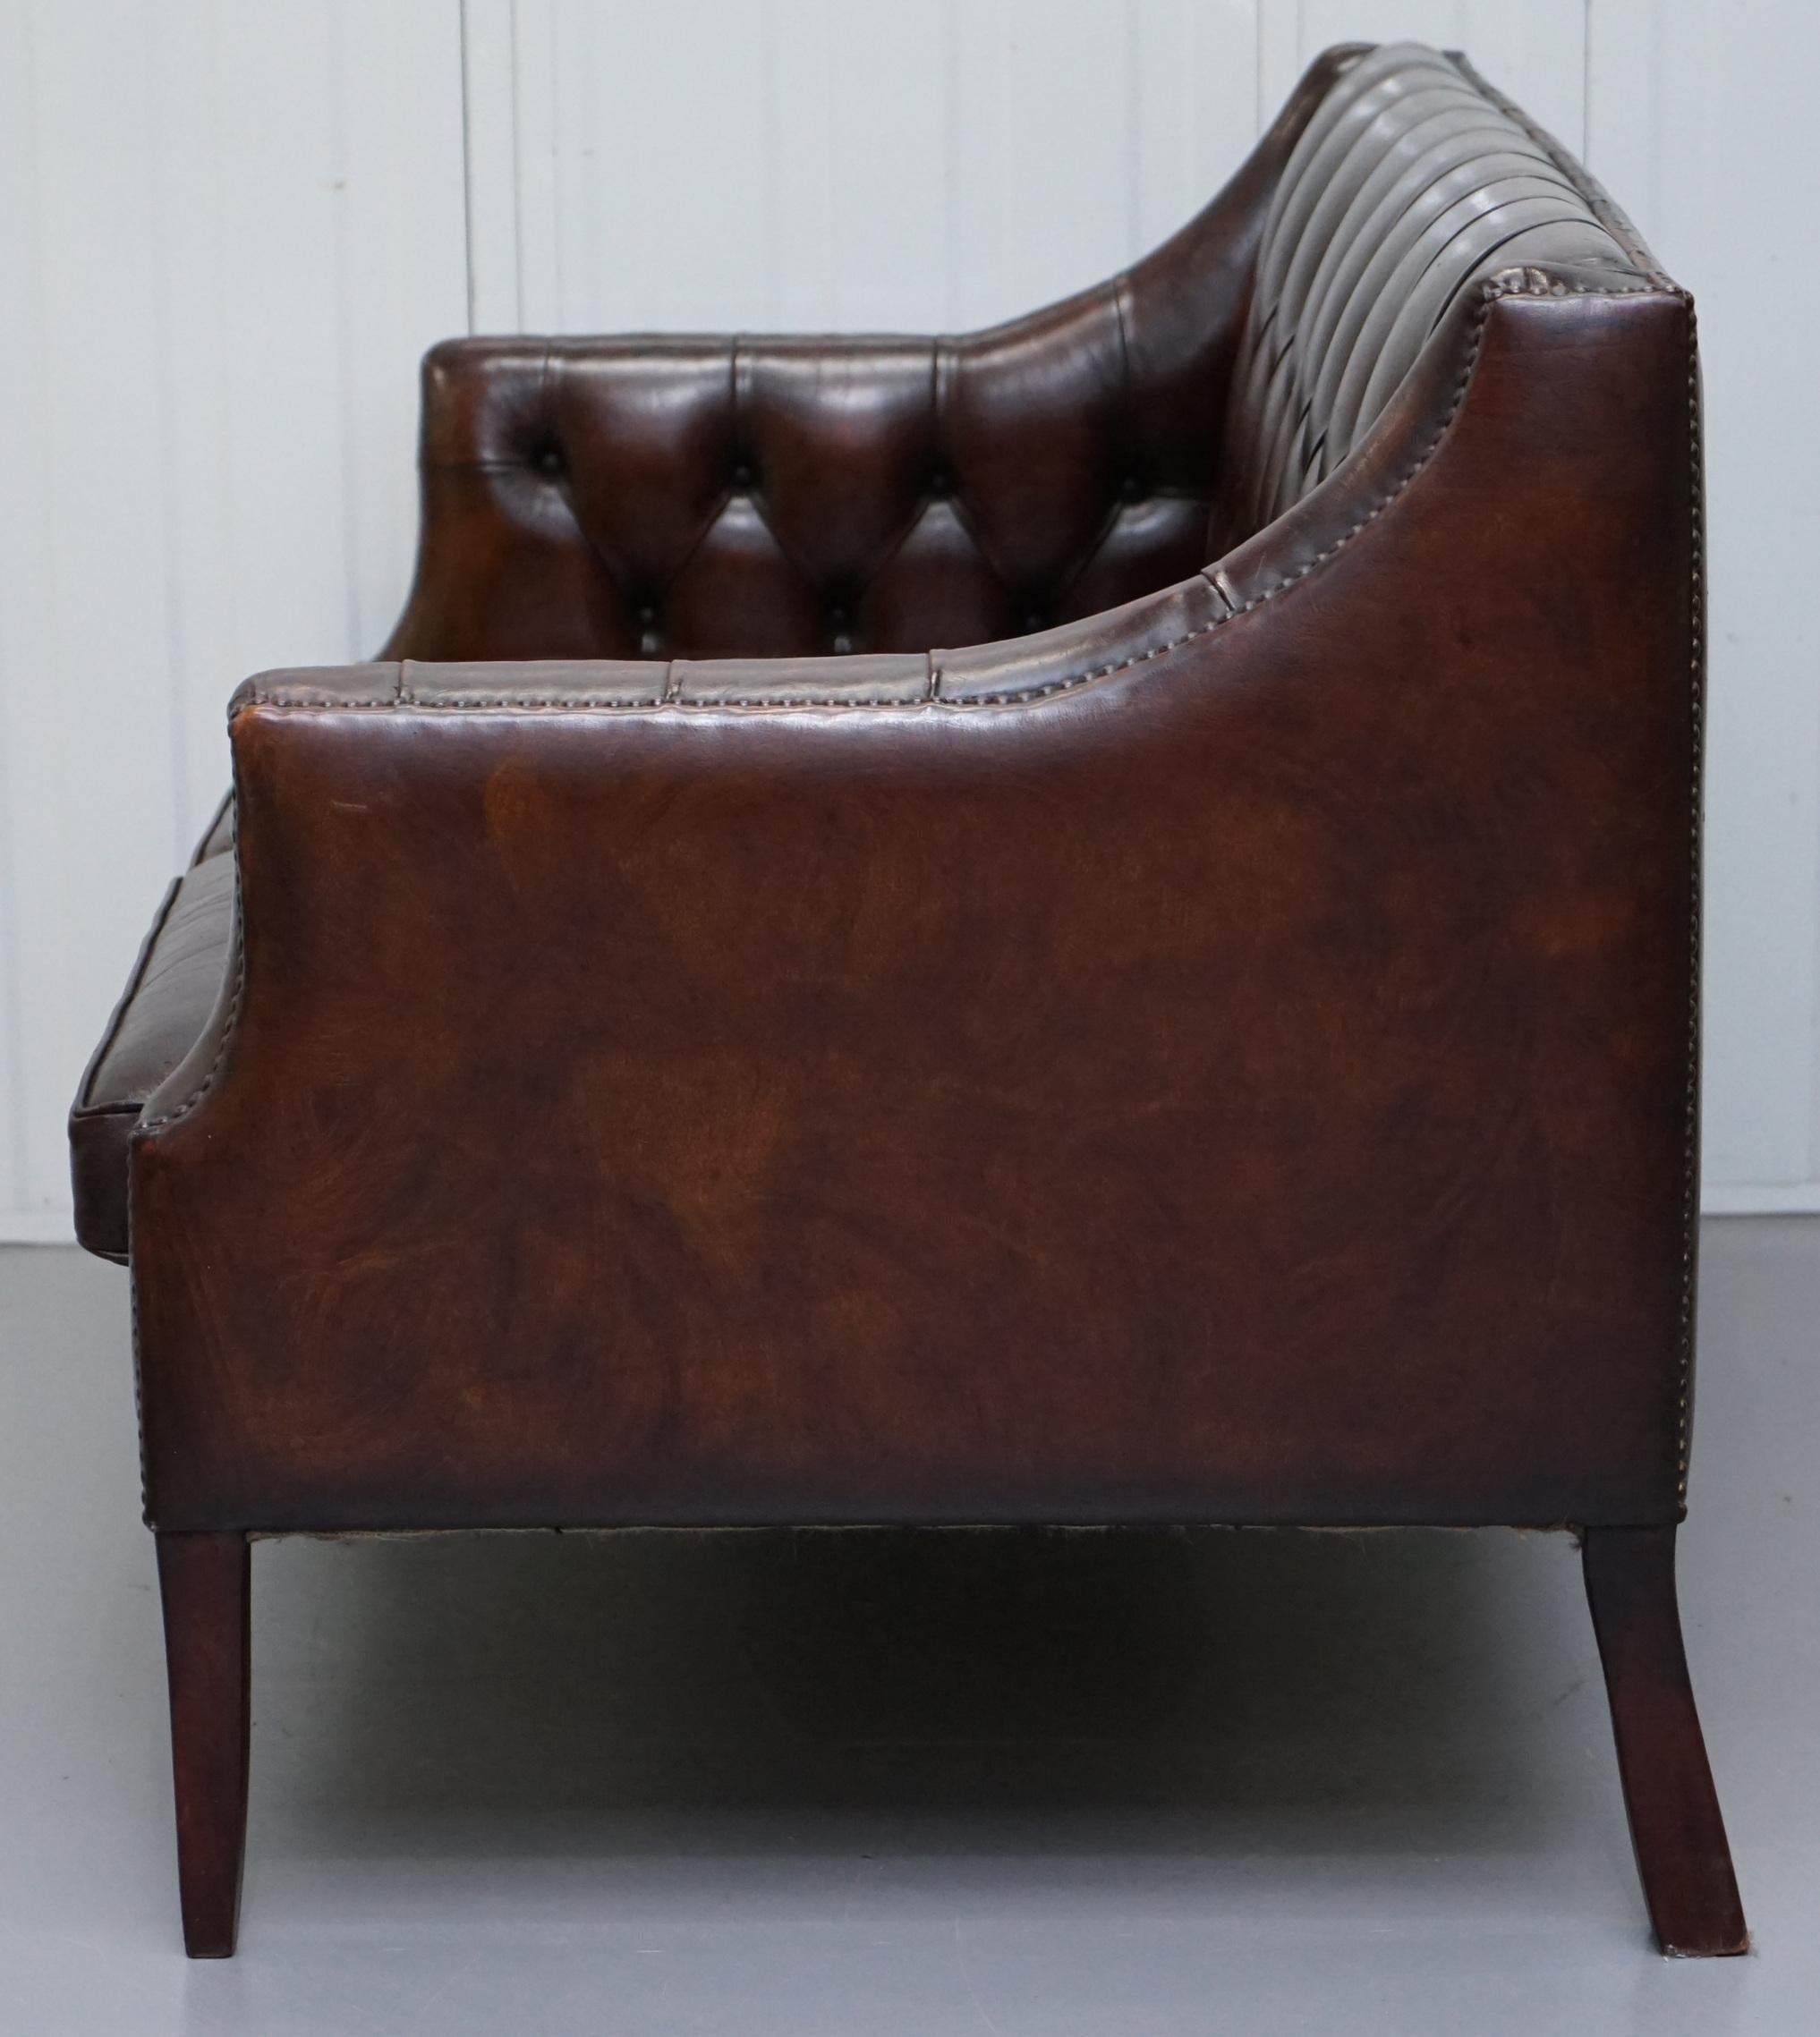 Restored Lutyen's Viceroy Chesterfield Brown Leather Two-Seat Sofa 11